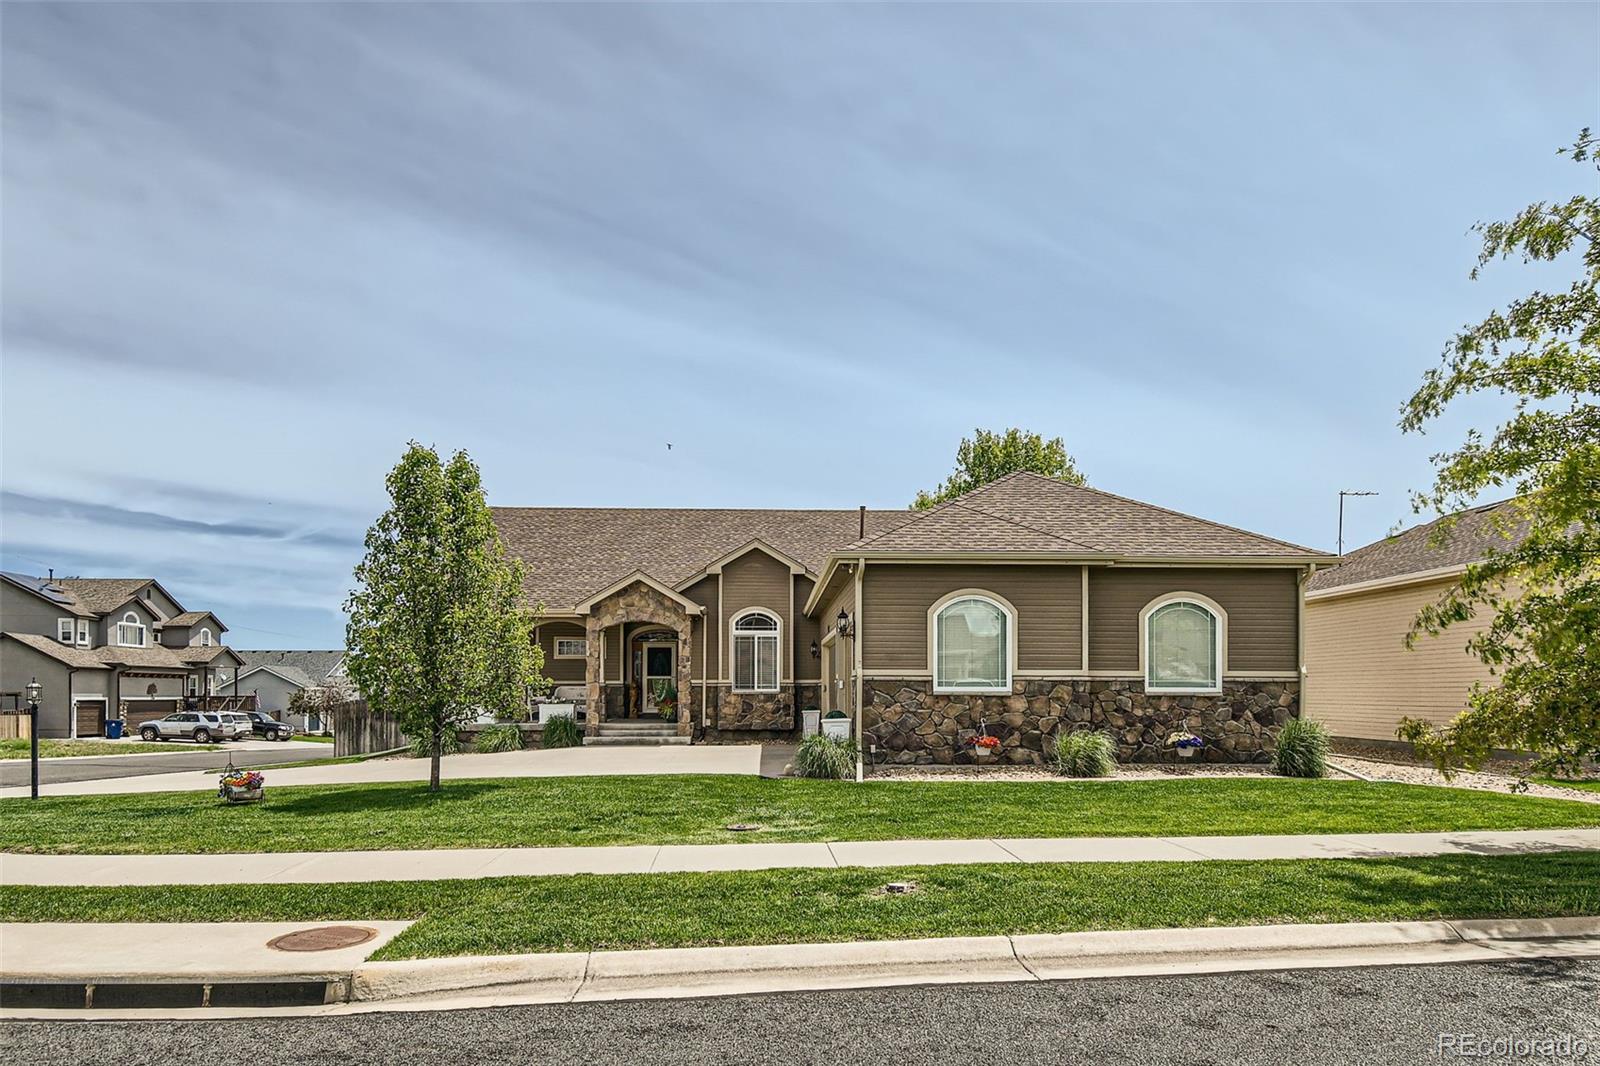 Report Image for 5498  Wetlands Drive,Frederick, Colorado